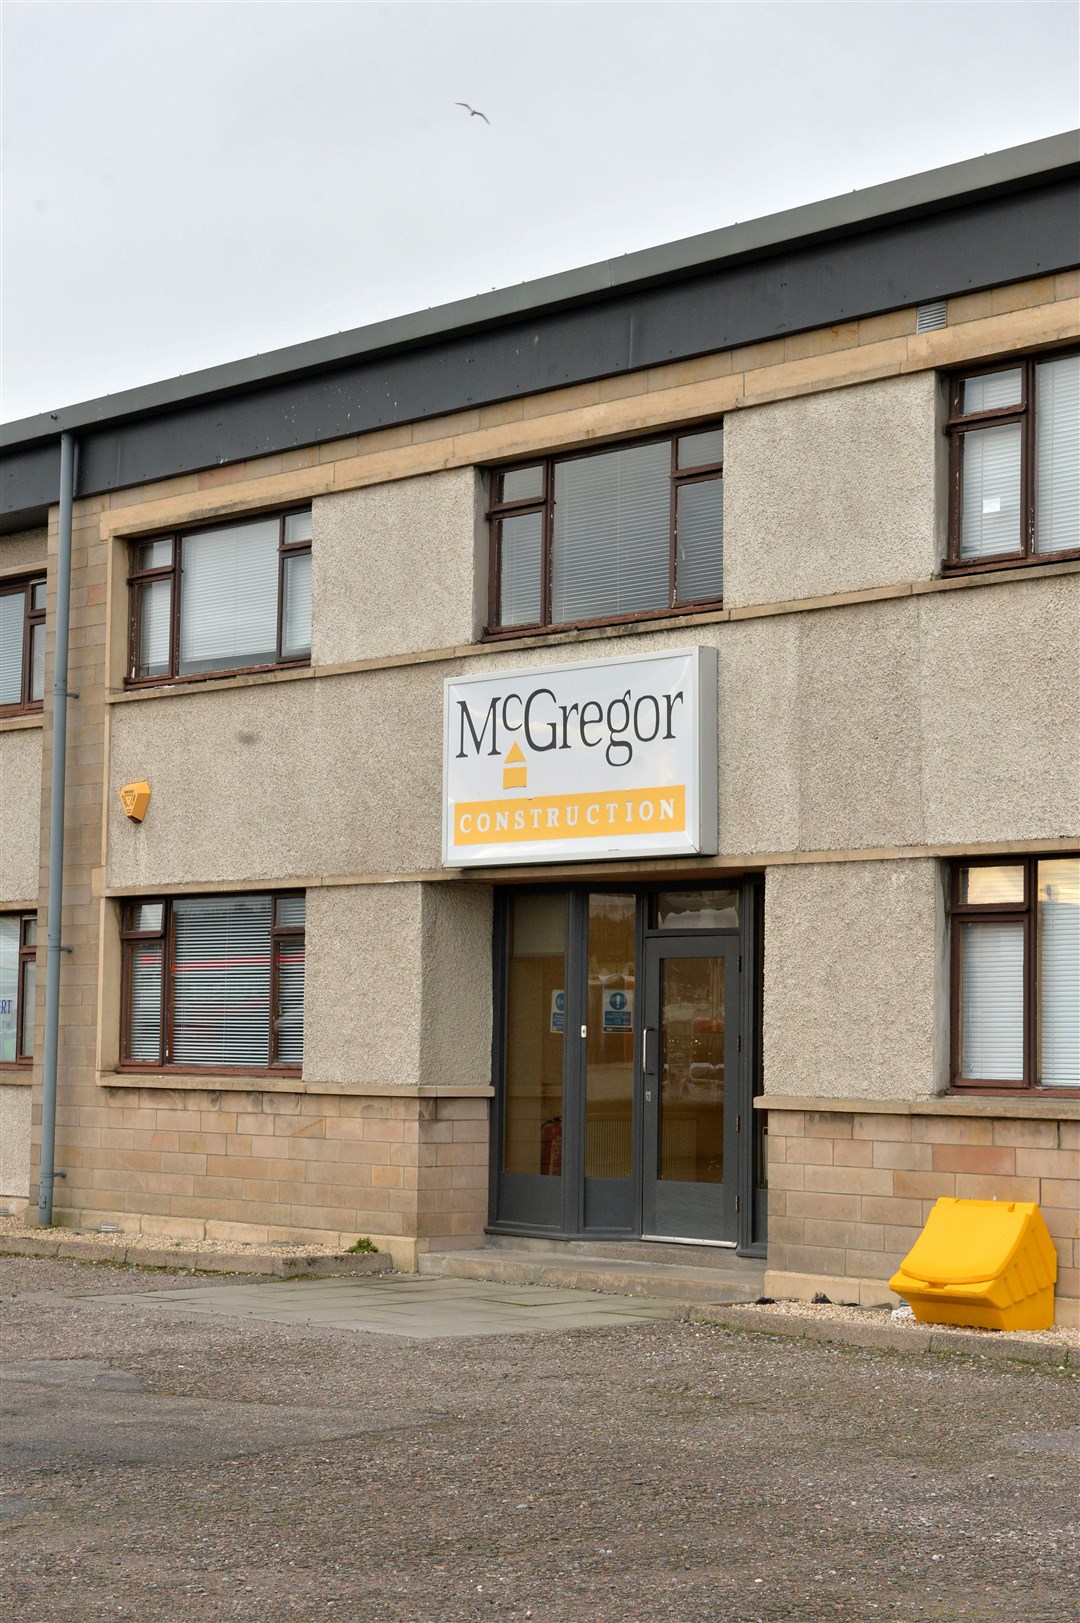 One of the oldest construction companies in the Highlands, McGregor Construction has a history which date back over 140 years.